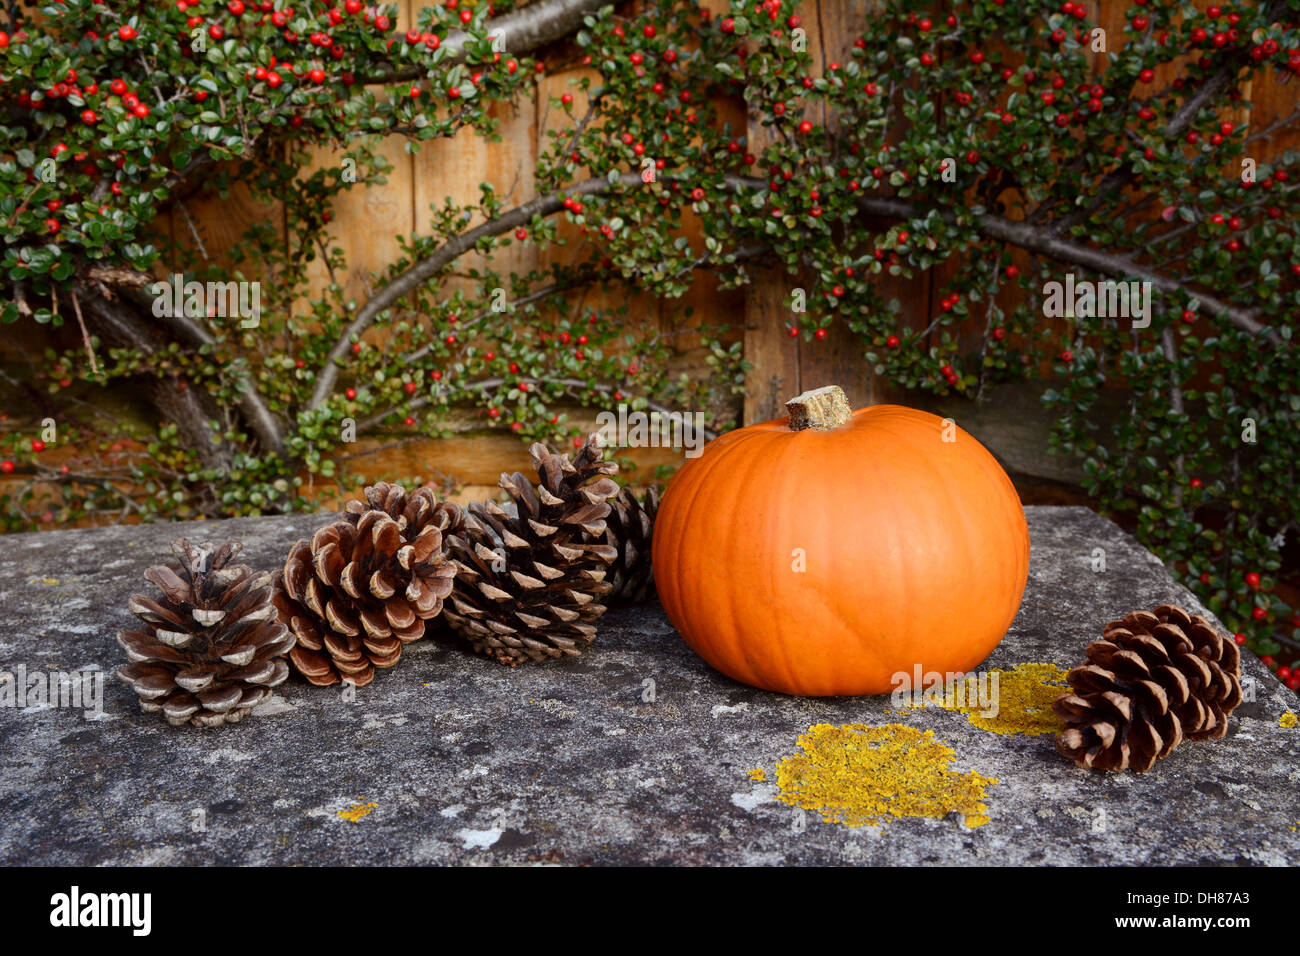 Small pumpkin and fir cones on a stone bench with background of red cotoneaster berries Stock Photo